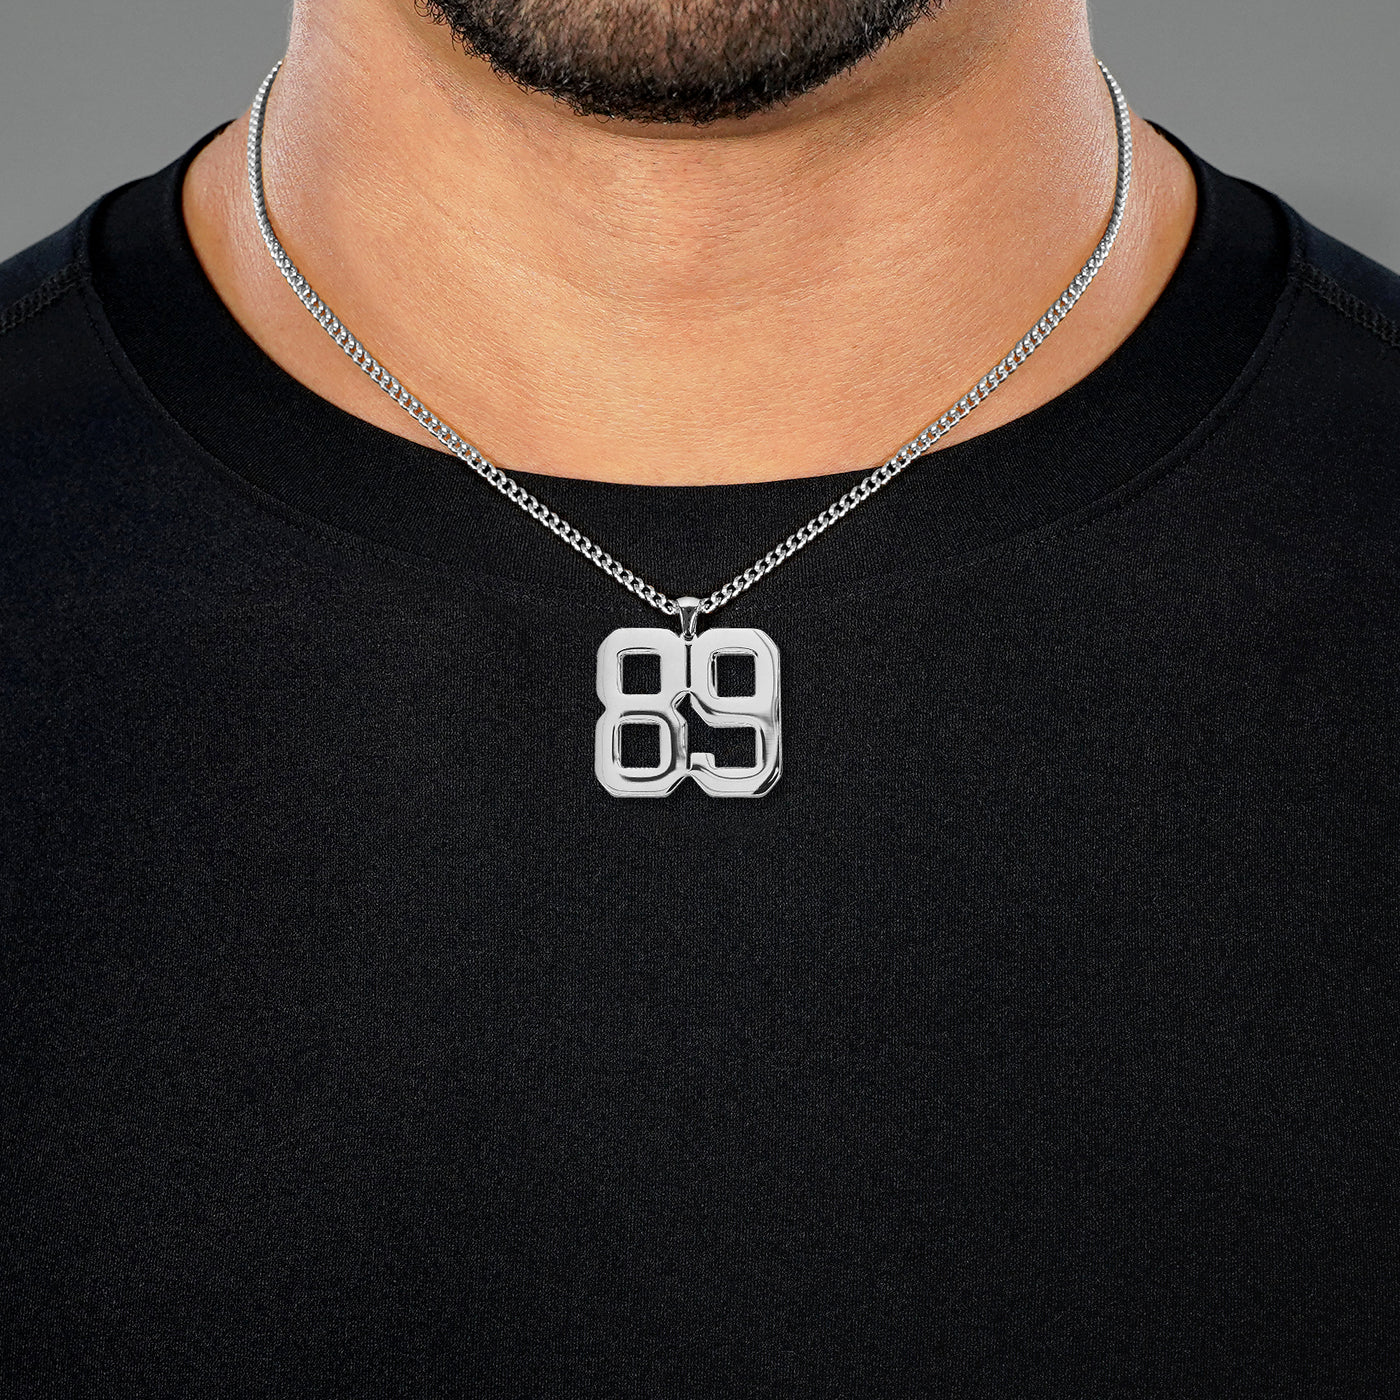 89 Number Pendant with Chain Necklace - Stainless Steel